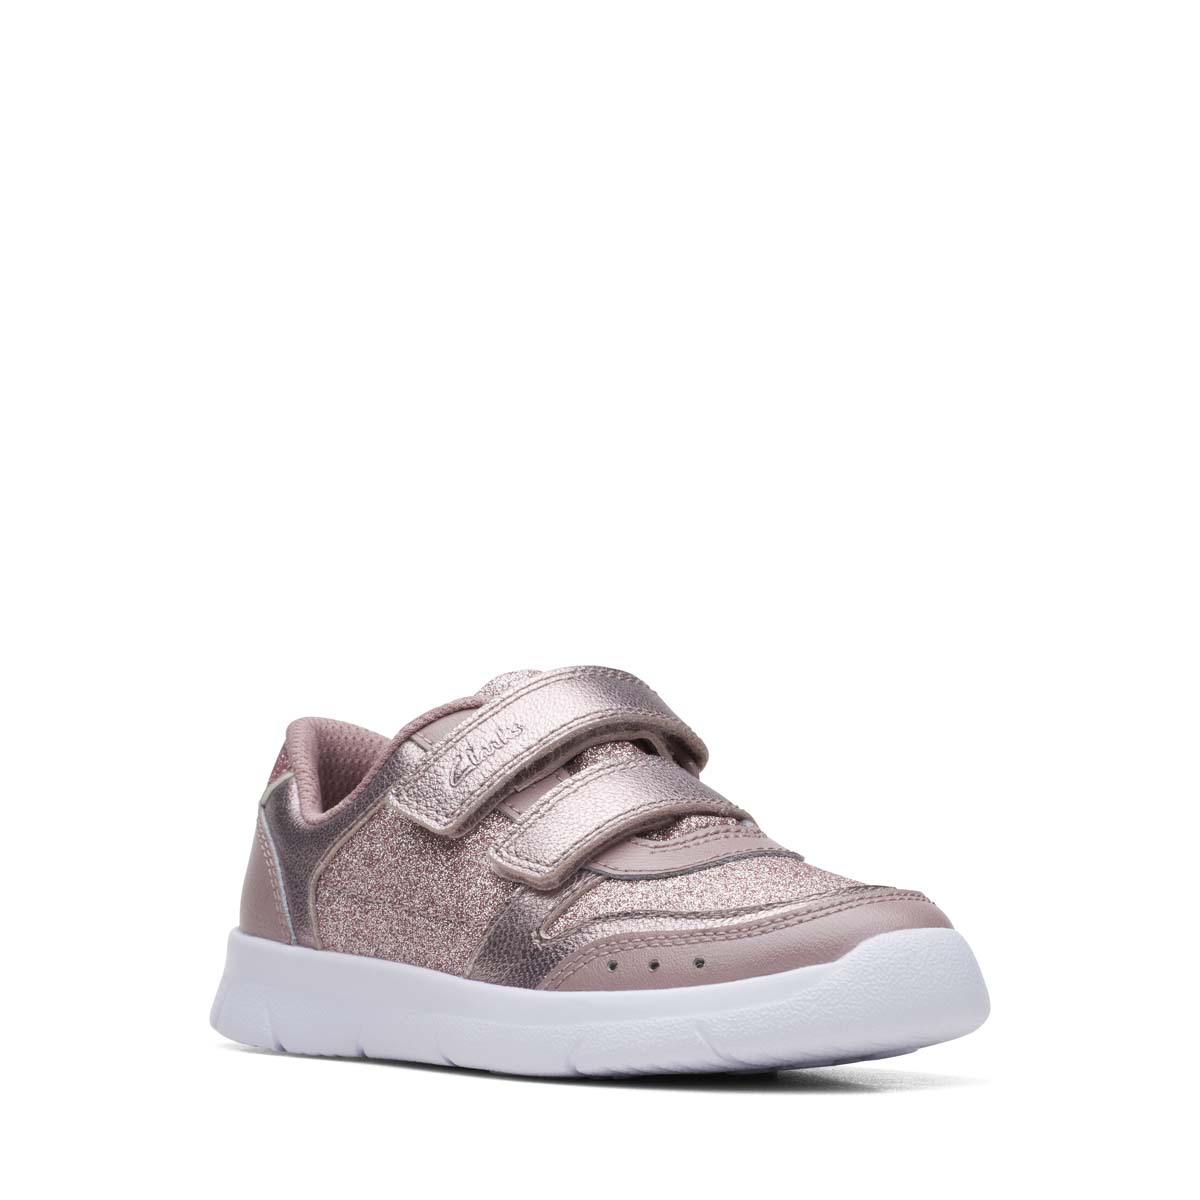 Clarks Ath Sonar K Pink Kids Toddler Girls Trainers 688686F In Size 7 In Plain Pink F Width Fitting Regular Fit For kids